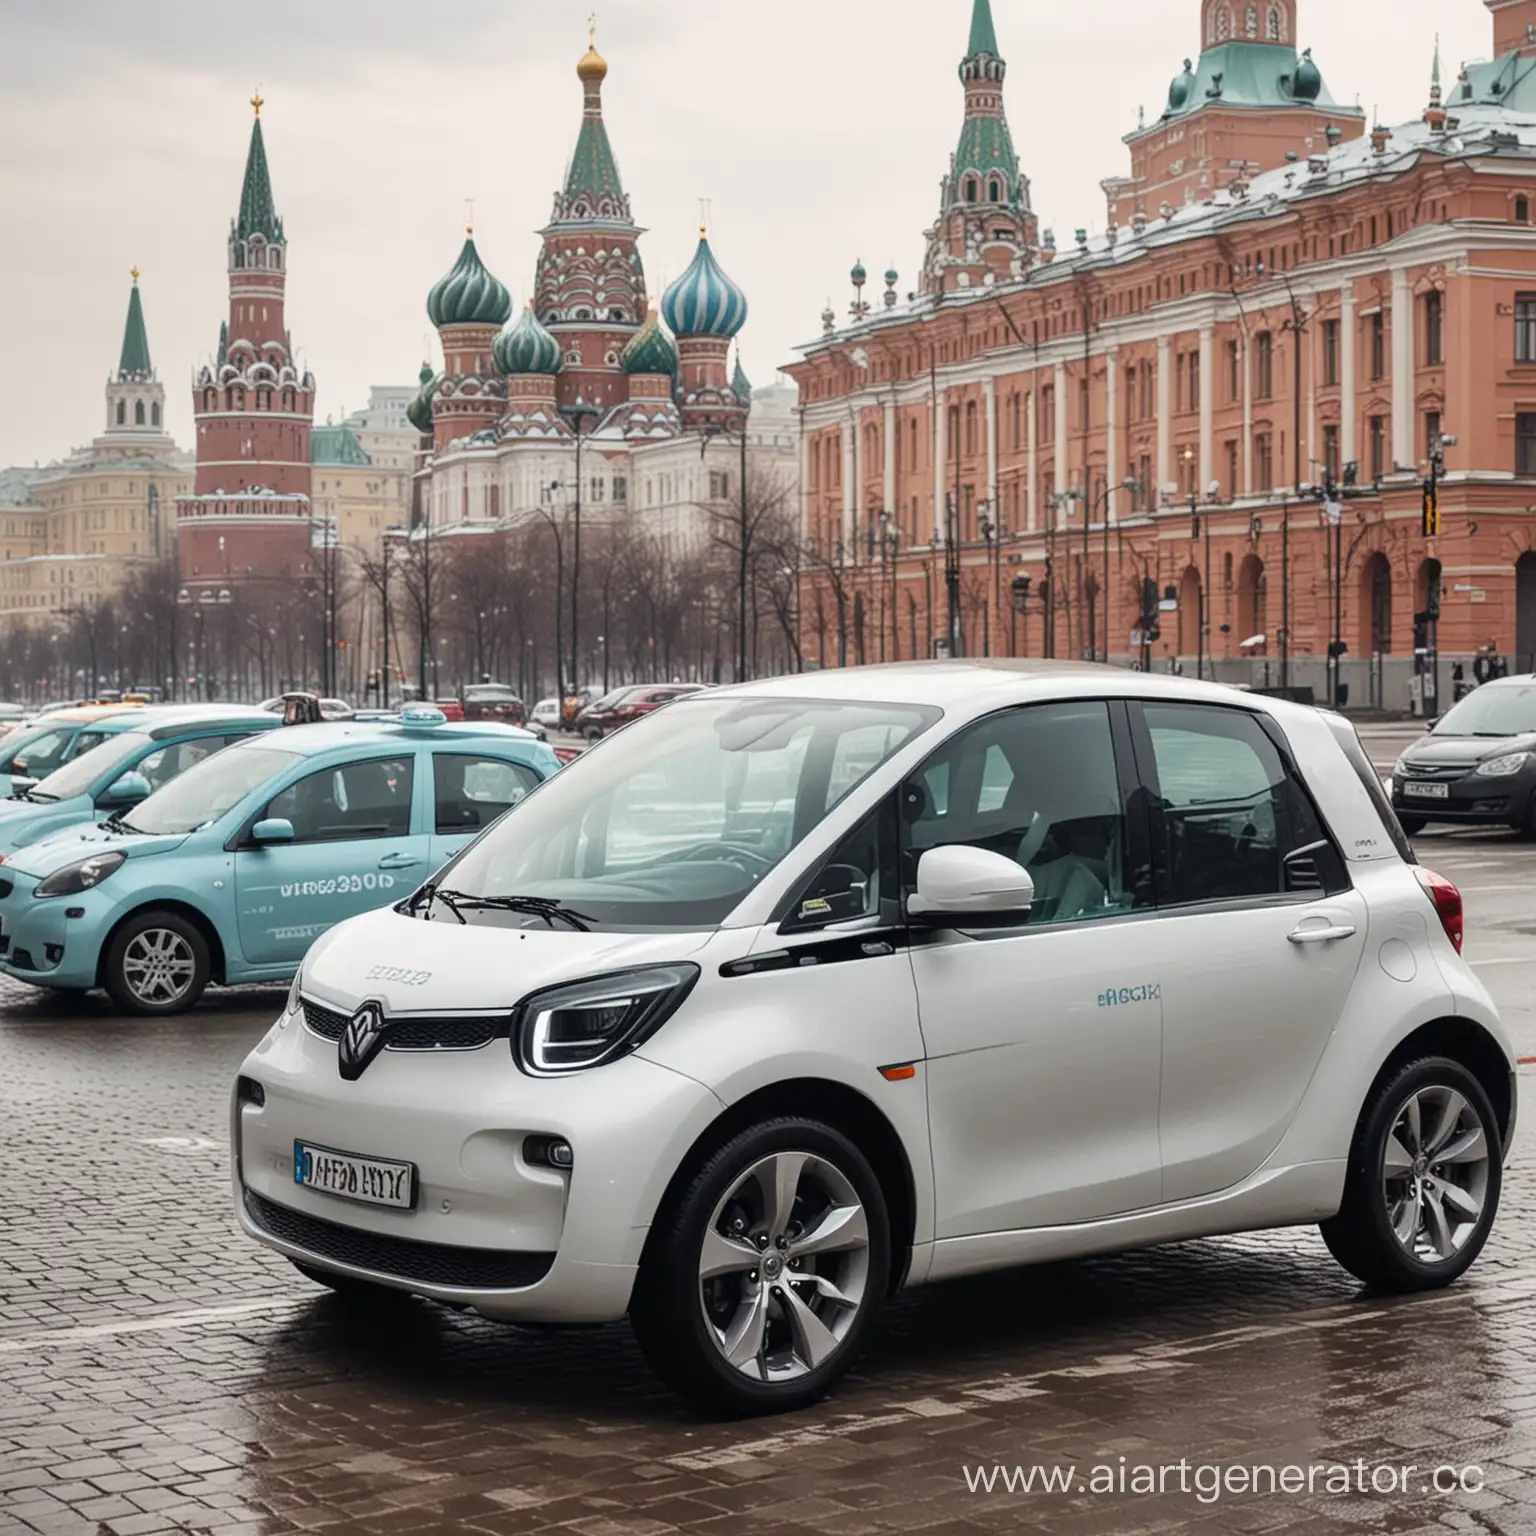 Futuristic-CarSharing-Service-in-Moscow-2125-Urban-Mobility-Innovation